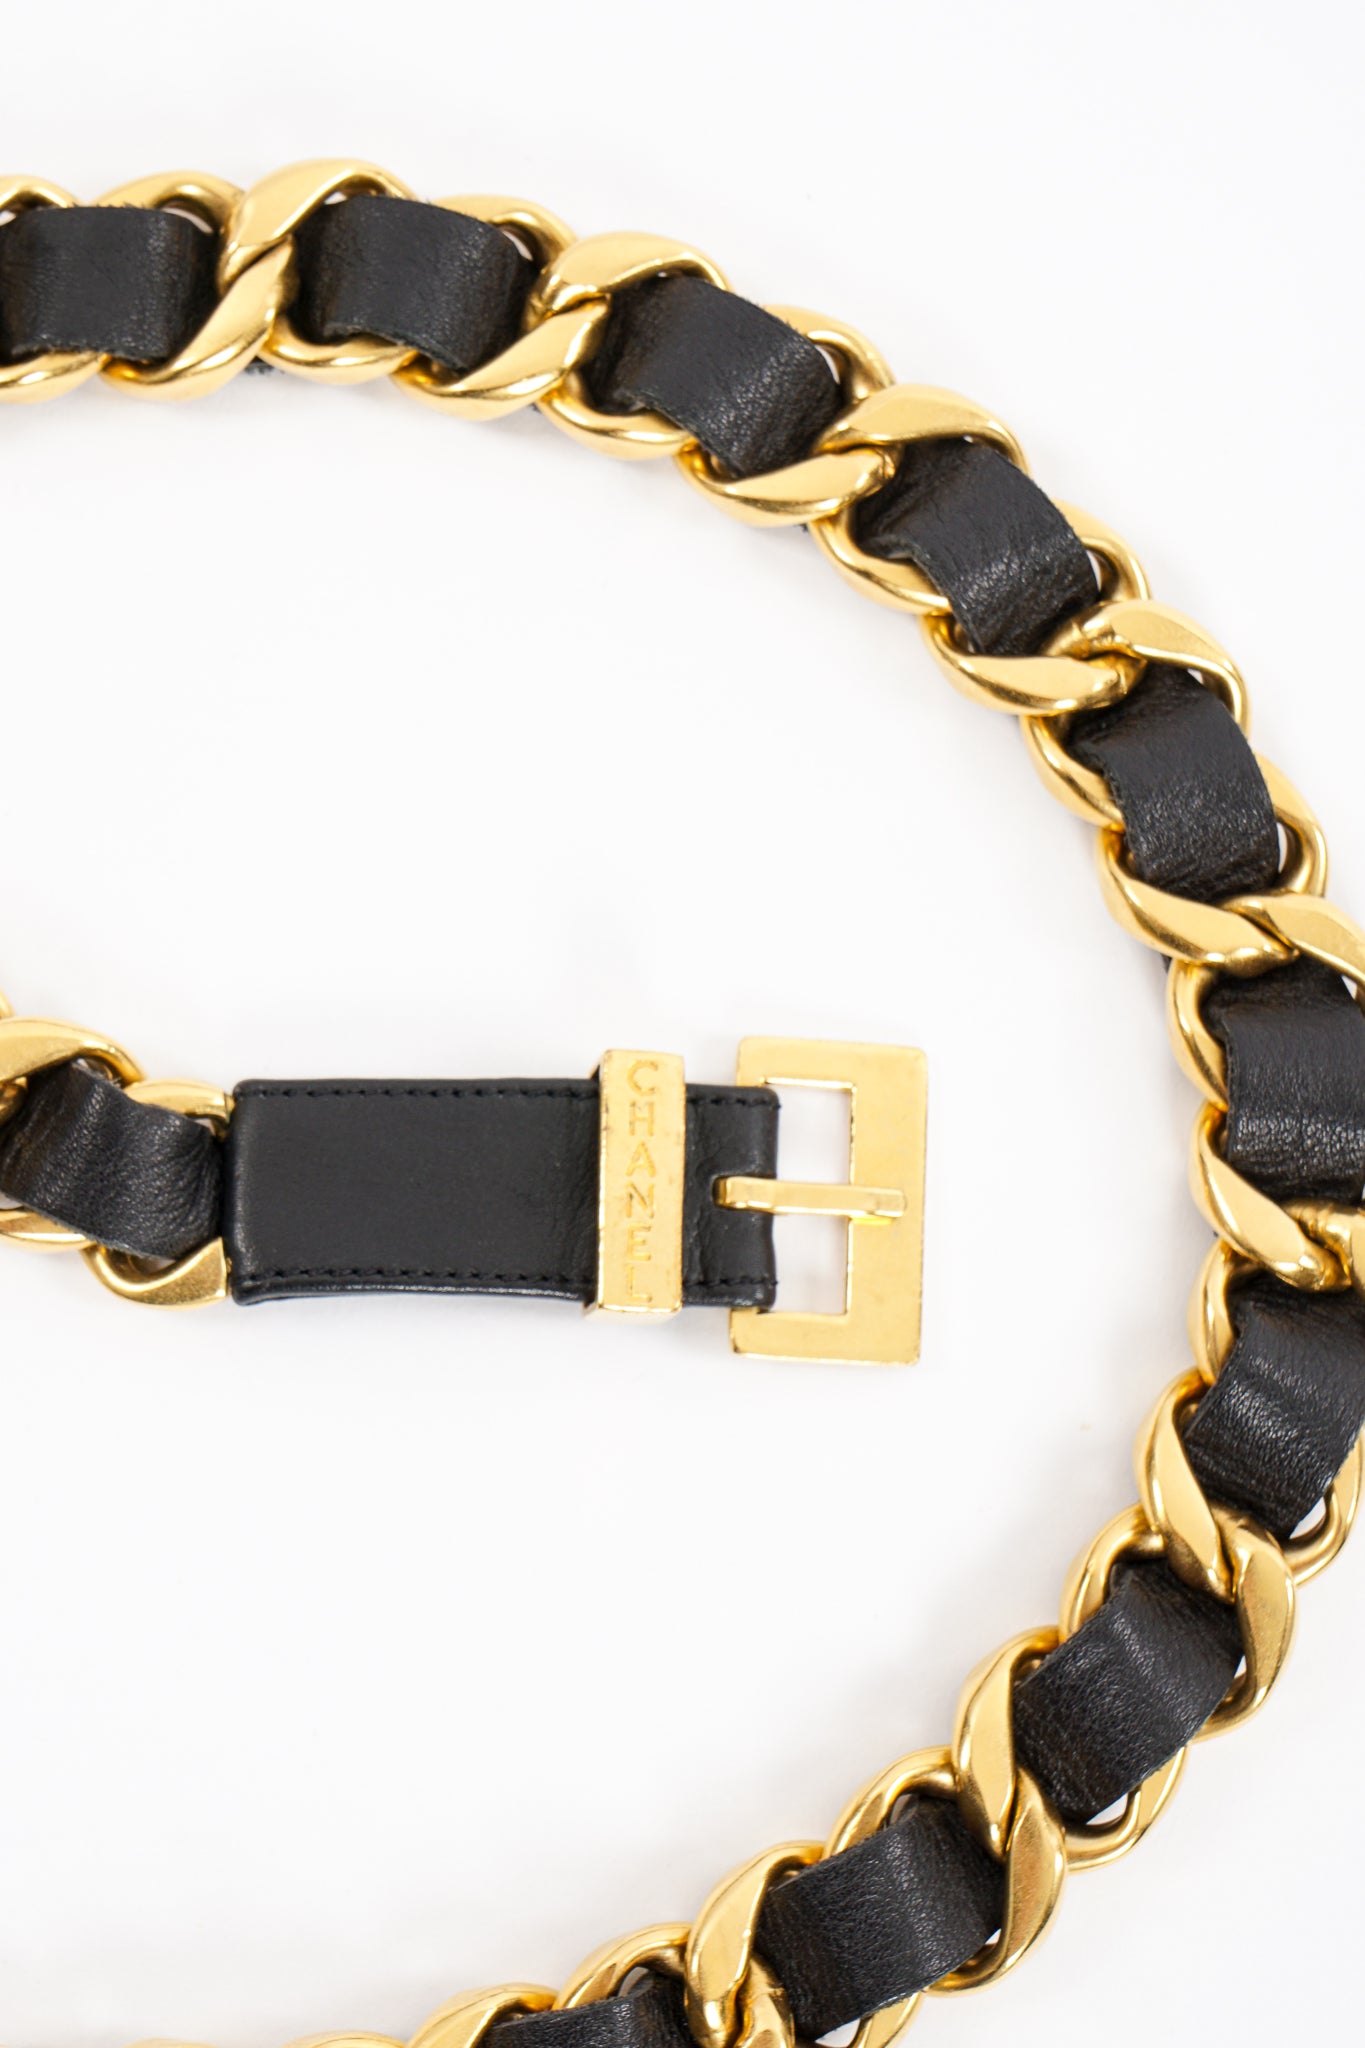 Vintage Chanel Iconic Woven Leather Chain Belt detail at Recess Los Angeles